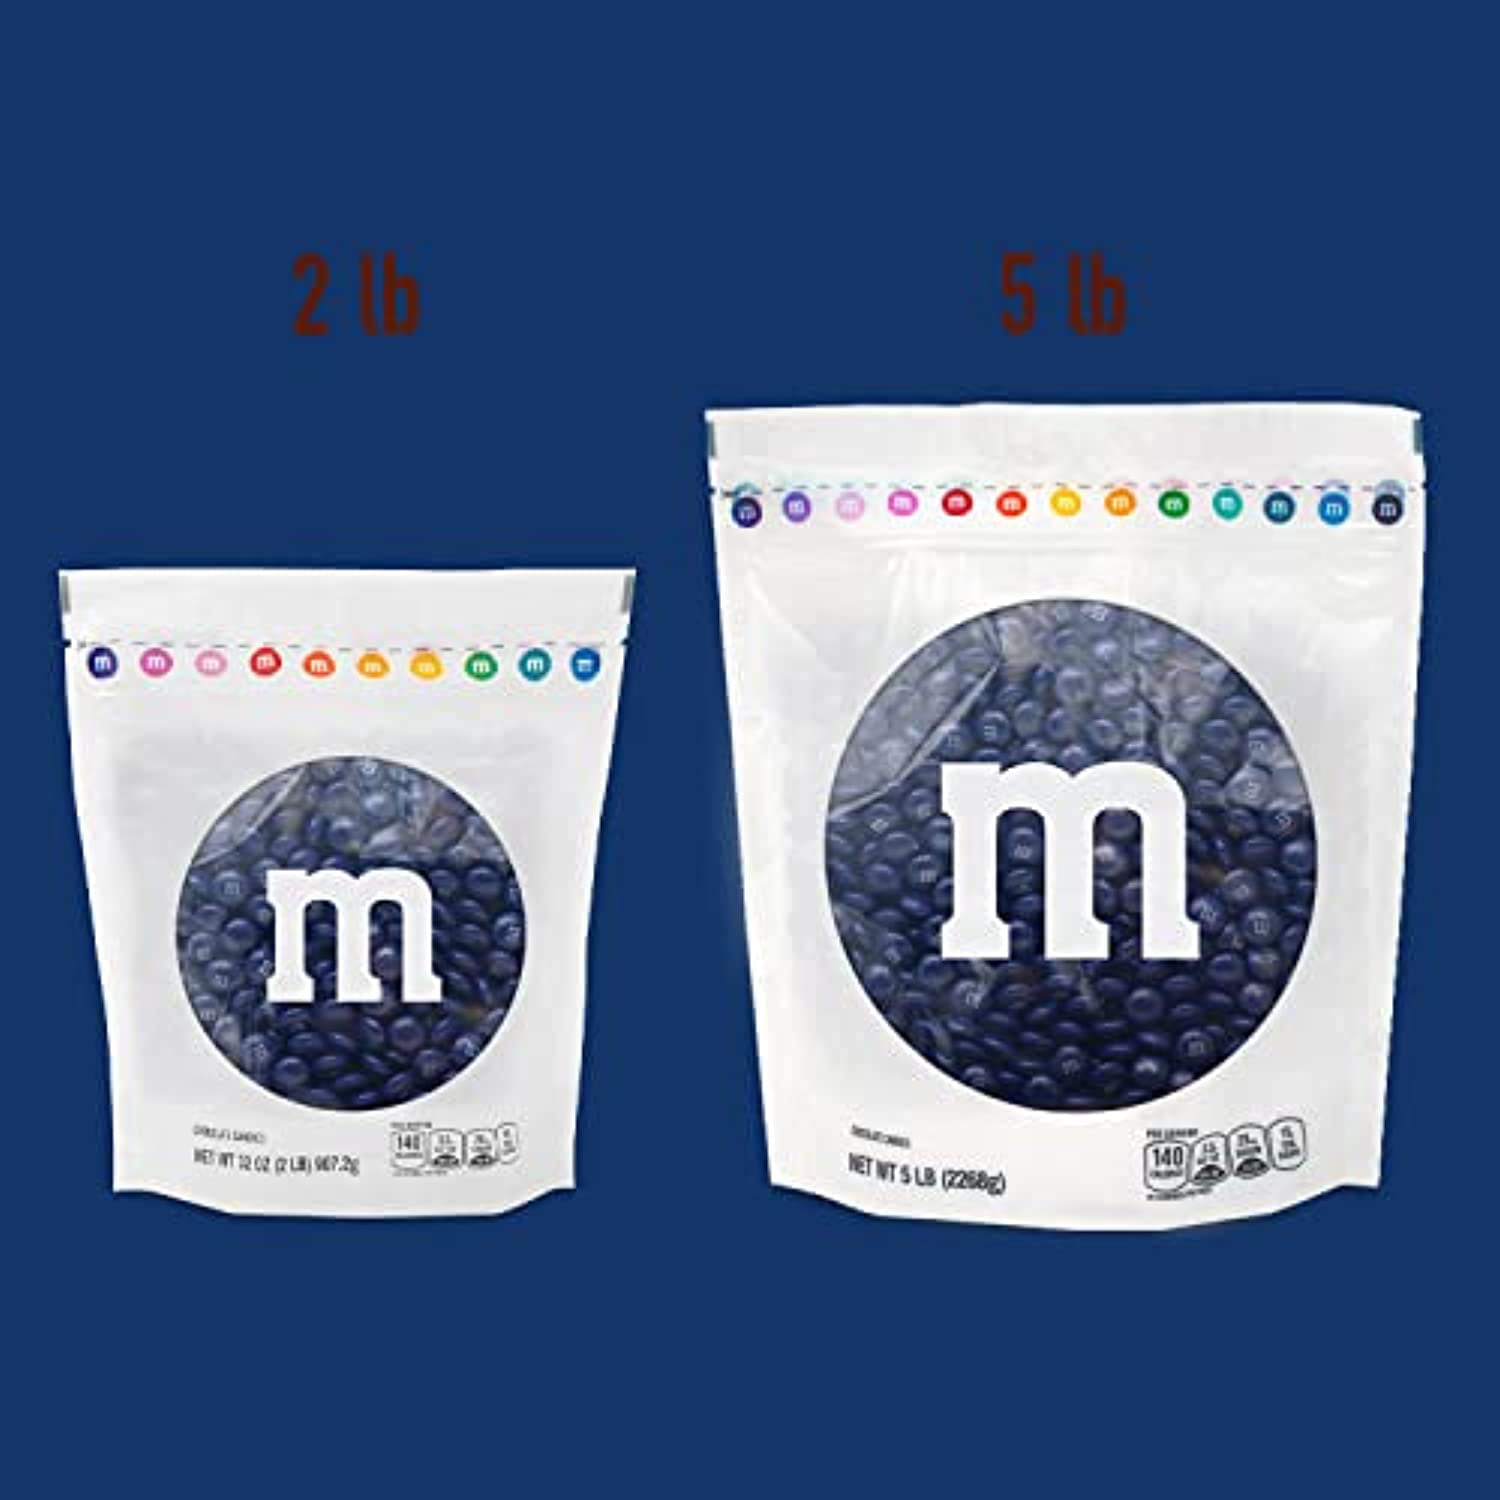  M&M'S Peanut Blue Chocolate Candy, 2lbs of Bulk Candy in  Resealable Pack for Graduations, Weddings, 4th of July, Birthday Parties,  Candy Bars, Dessert Tables & DIY Party Favors : Grocery 